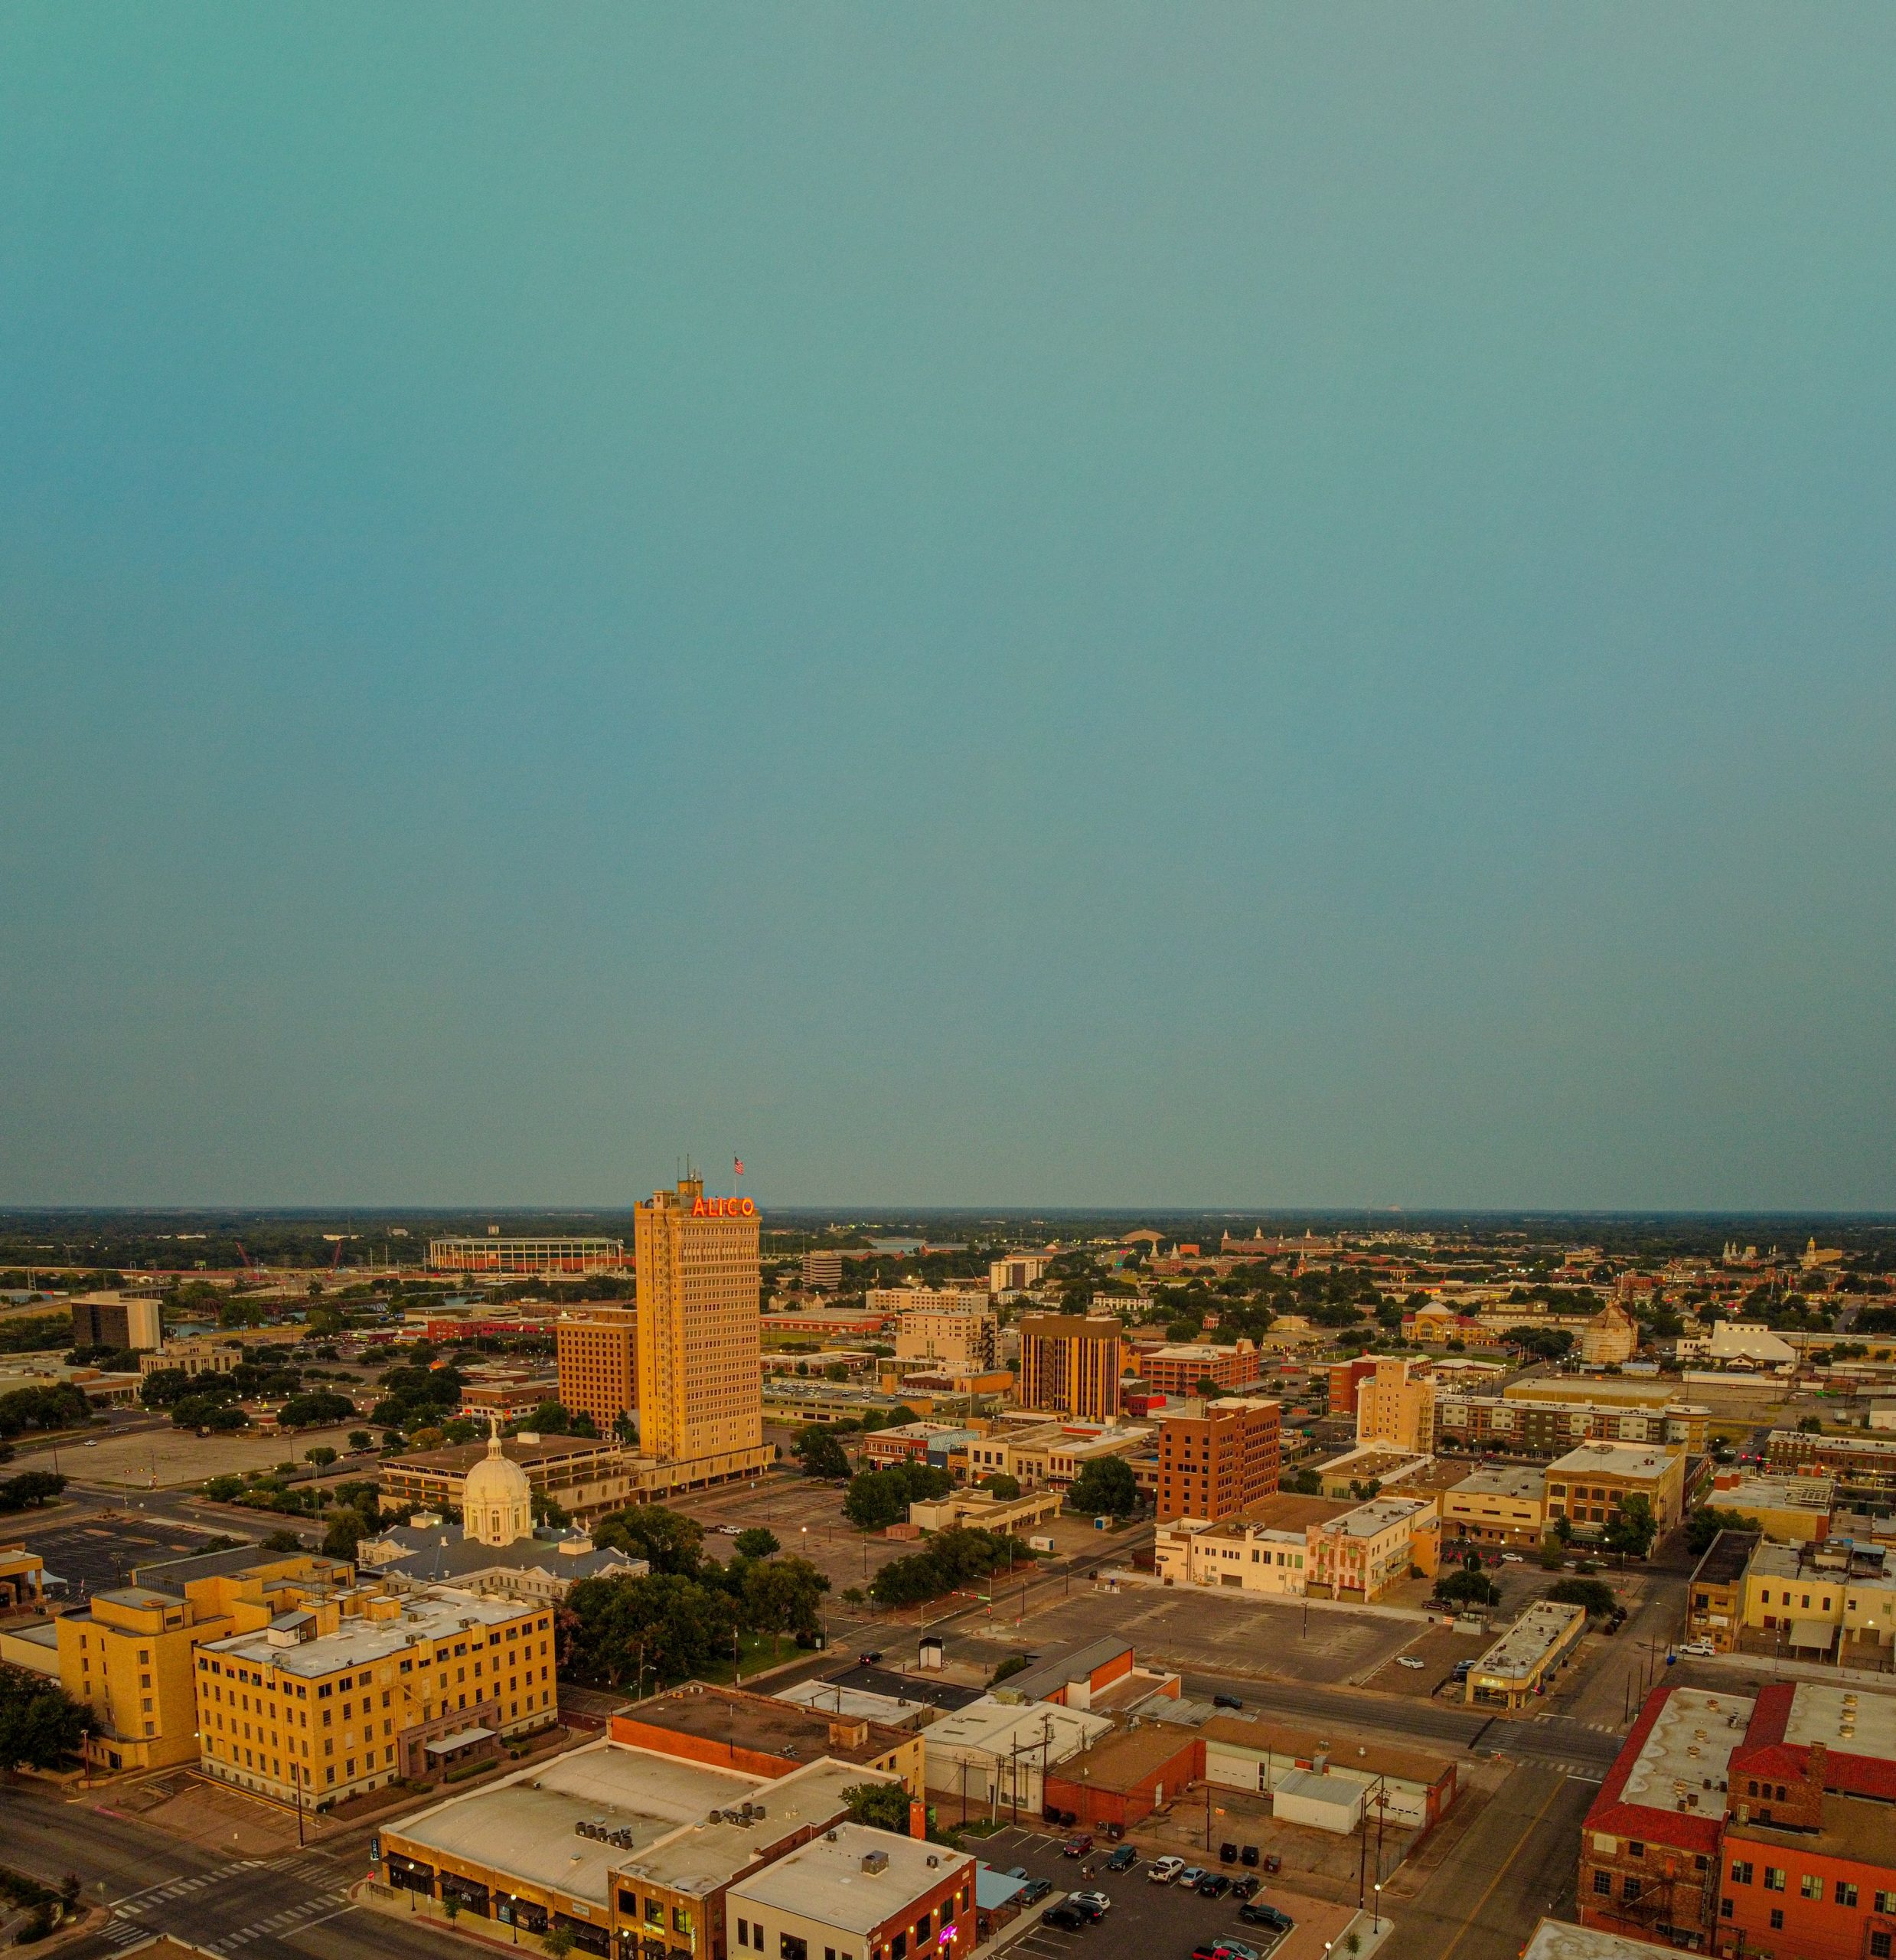 Modern Day Waco Texas from an Aerial View 